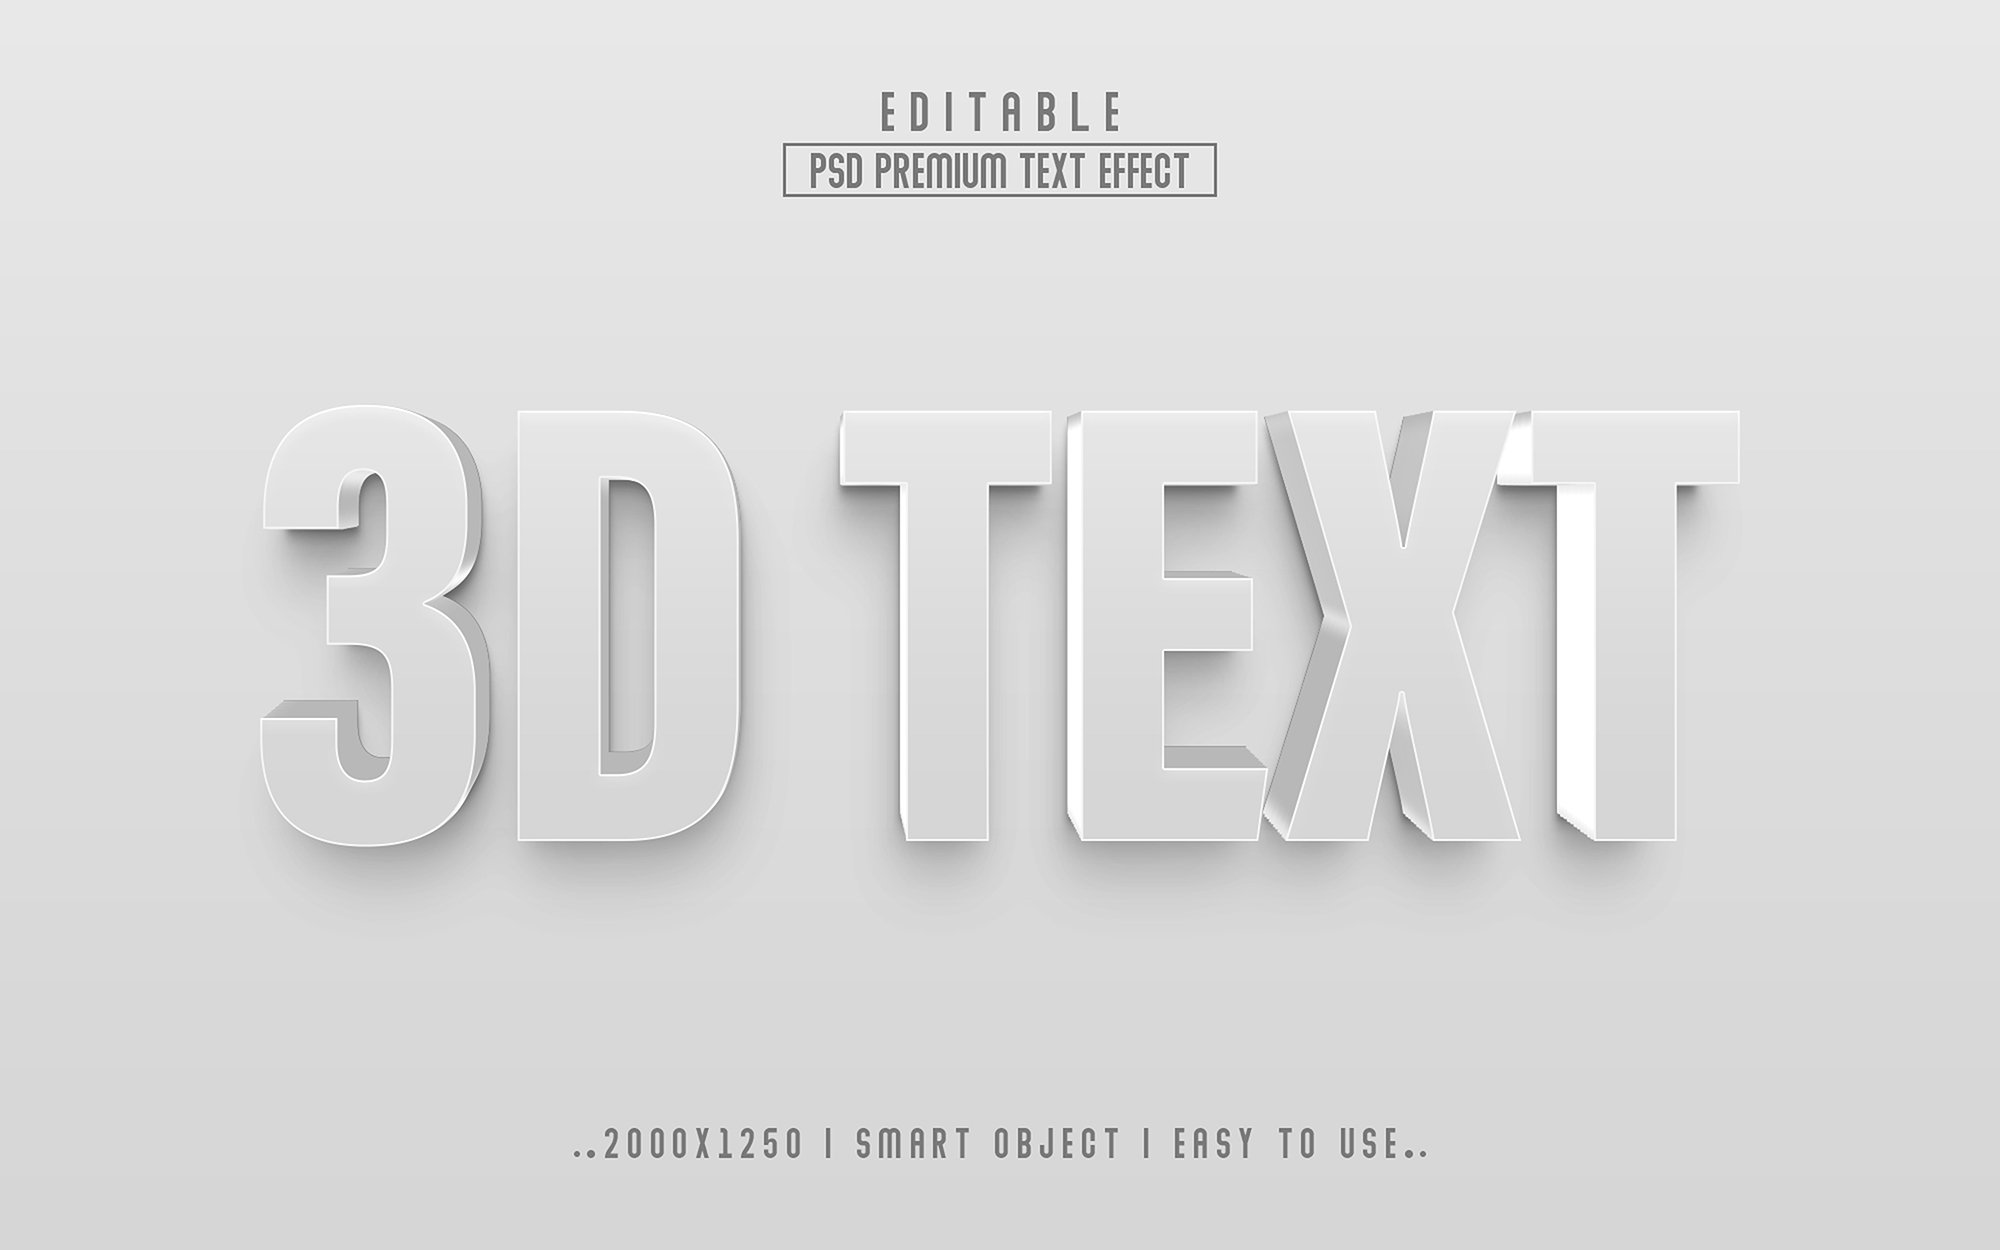 3D Text effect style templatecover image.